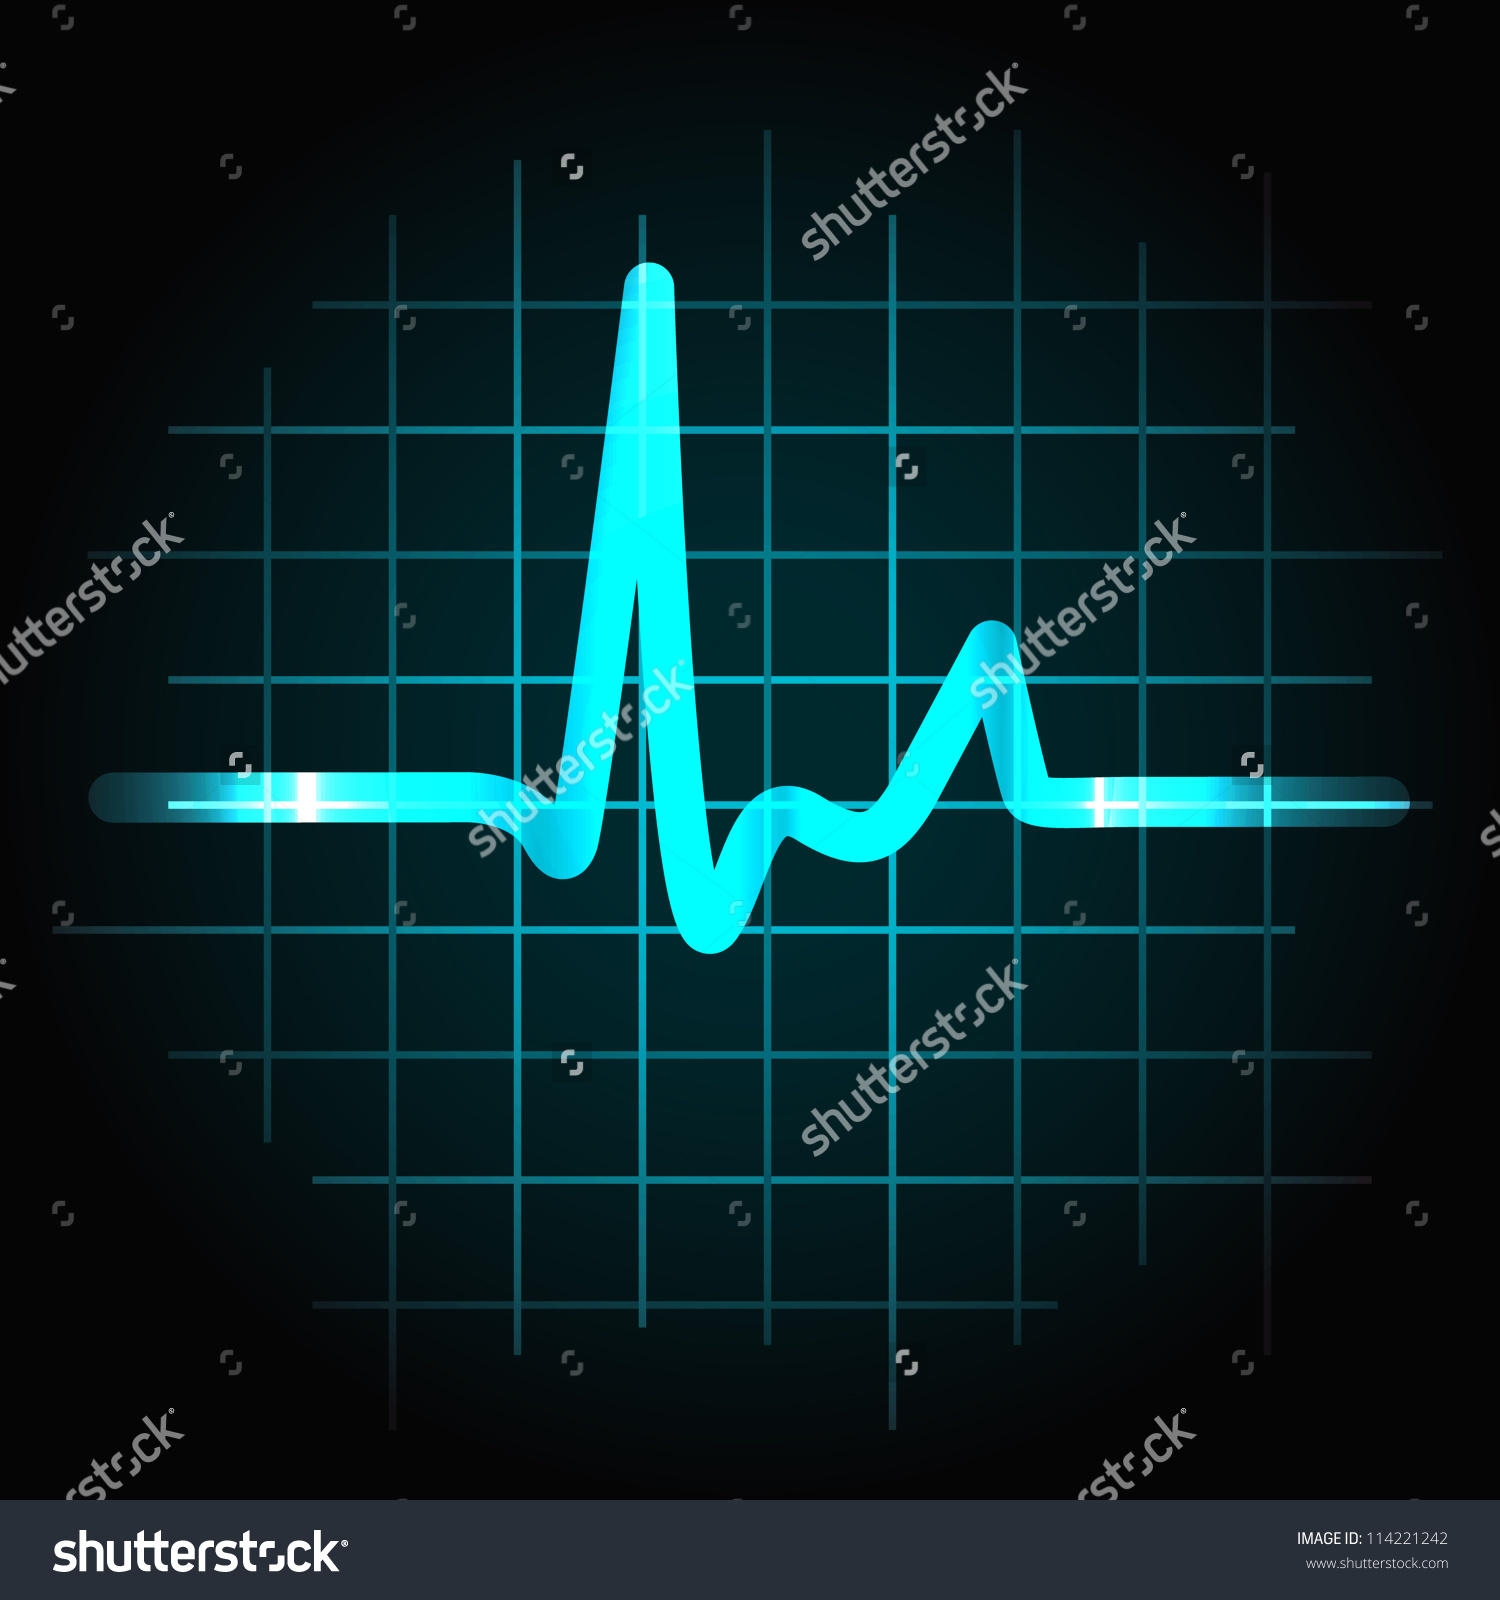 Images of Heartbeat Wave | 1500x1600